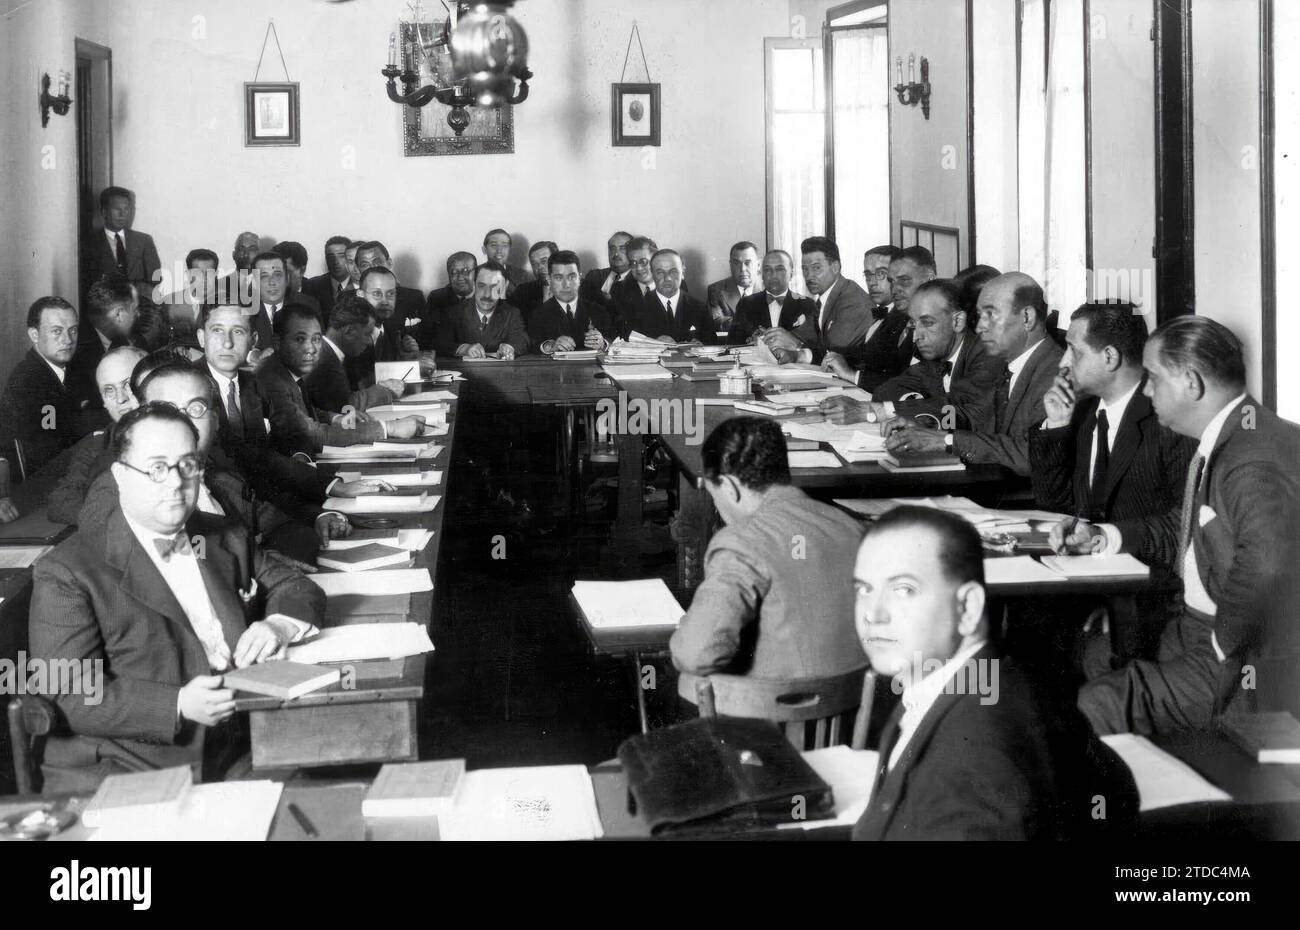 06/30/1931. National Assembly of Football Federations and Representatives: appearance of the room at the Inaugural session. In the Image, Messrs. Plantada, Rosich, Cabot, Suñol, Gutiérrez Alzaga, Muniesa, H. coronado and López García and Mr. Urquijo. Credit: Album / Archivo ABC / Piortiz Stock Photo